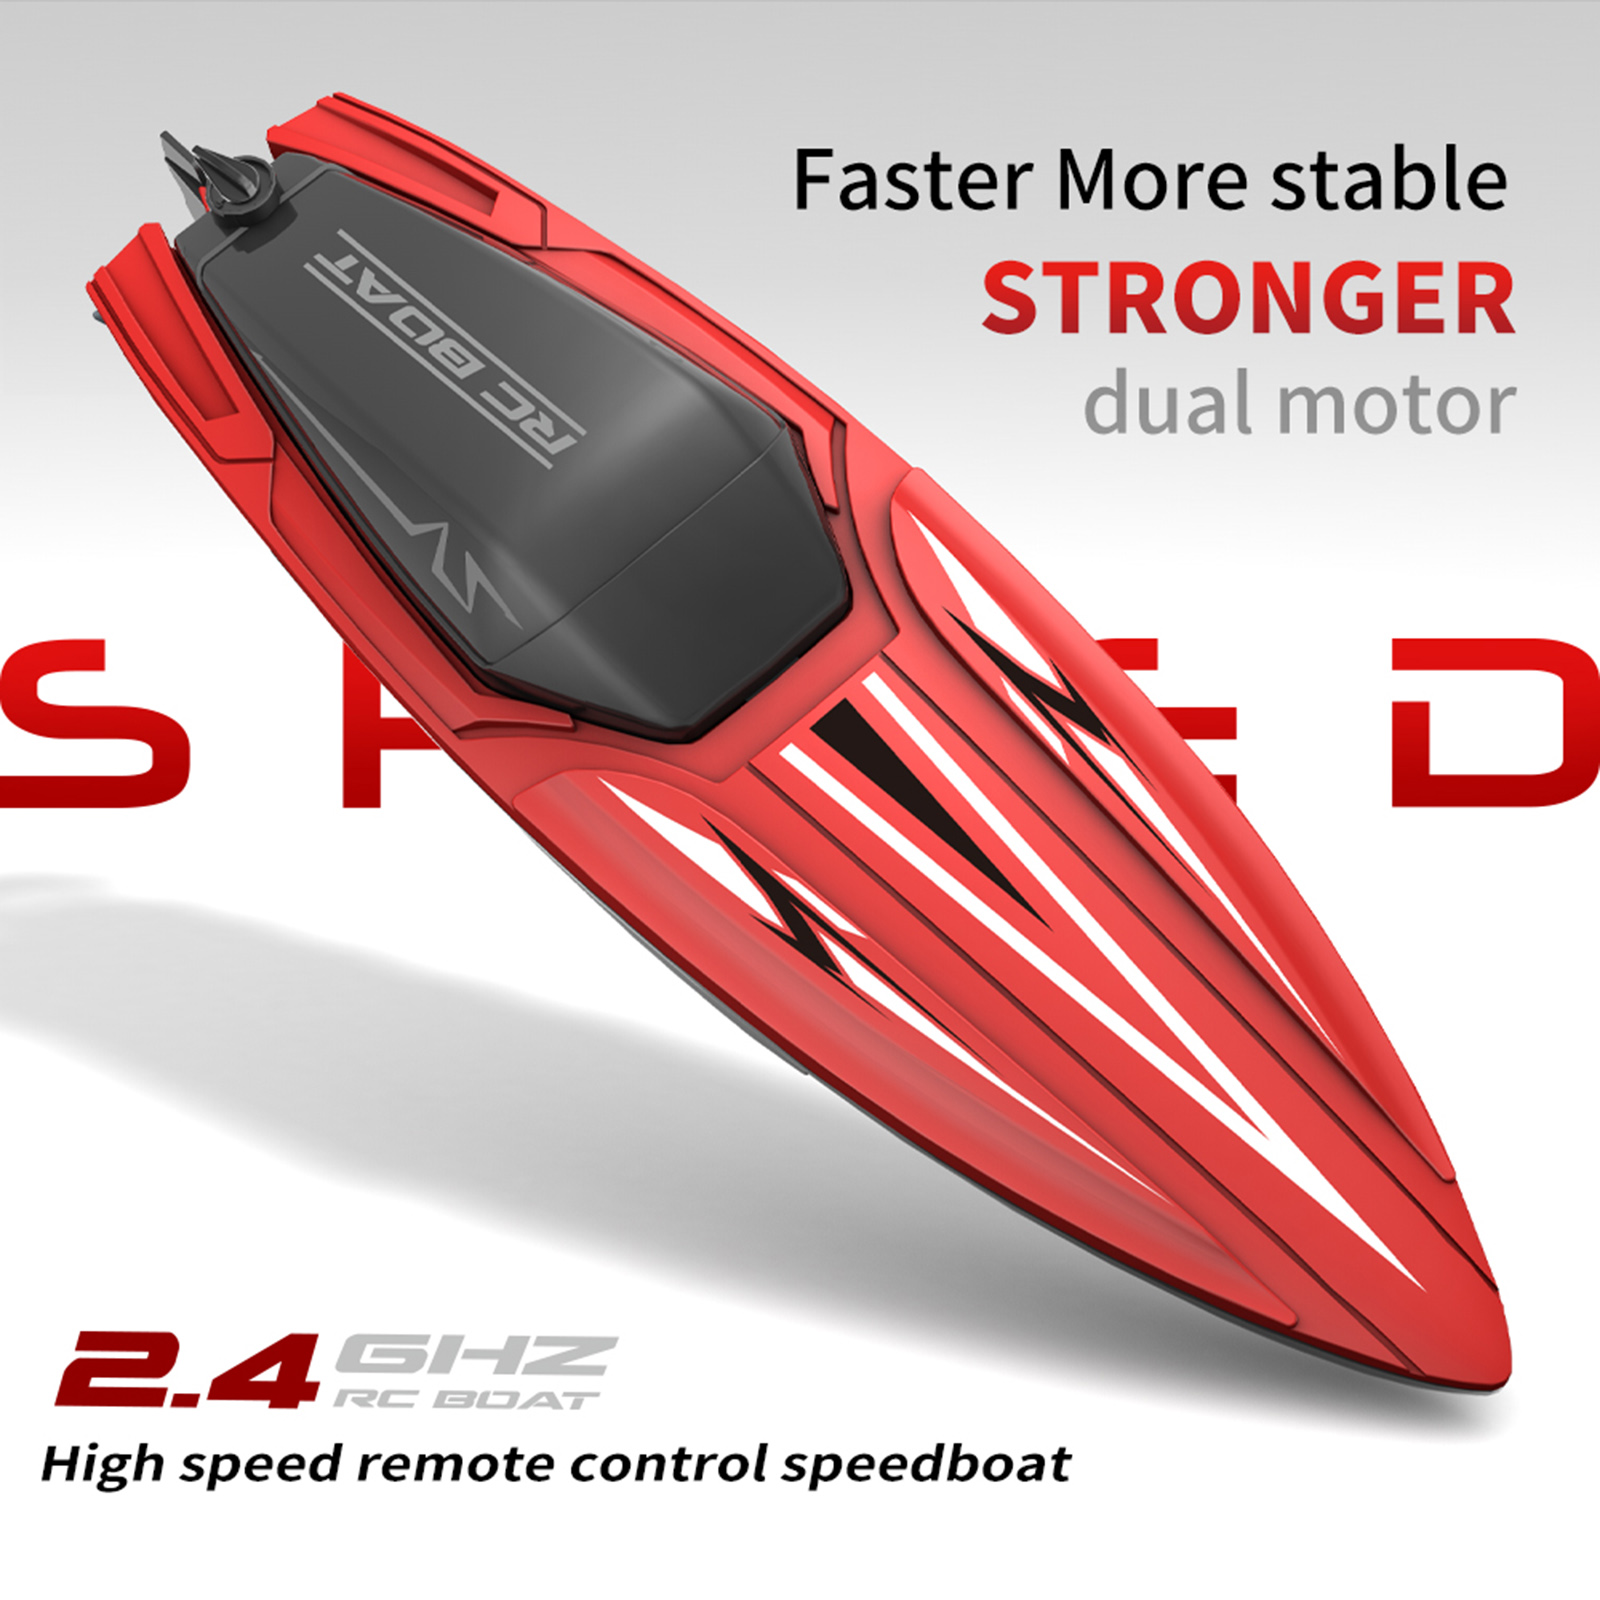 2.4G RC Boat Waterproof Rechargeable TY2 High Speed Racing Speedboat Model Electric Radio Control Outdoor Boat Toys for boys